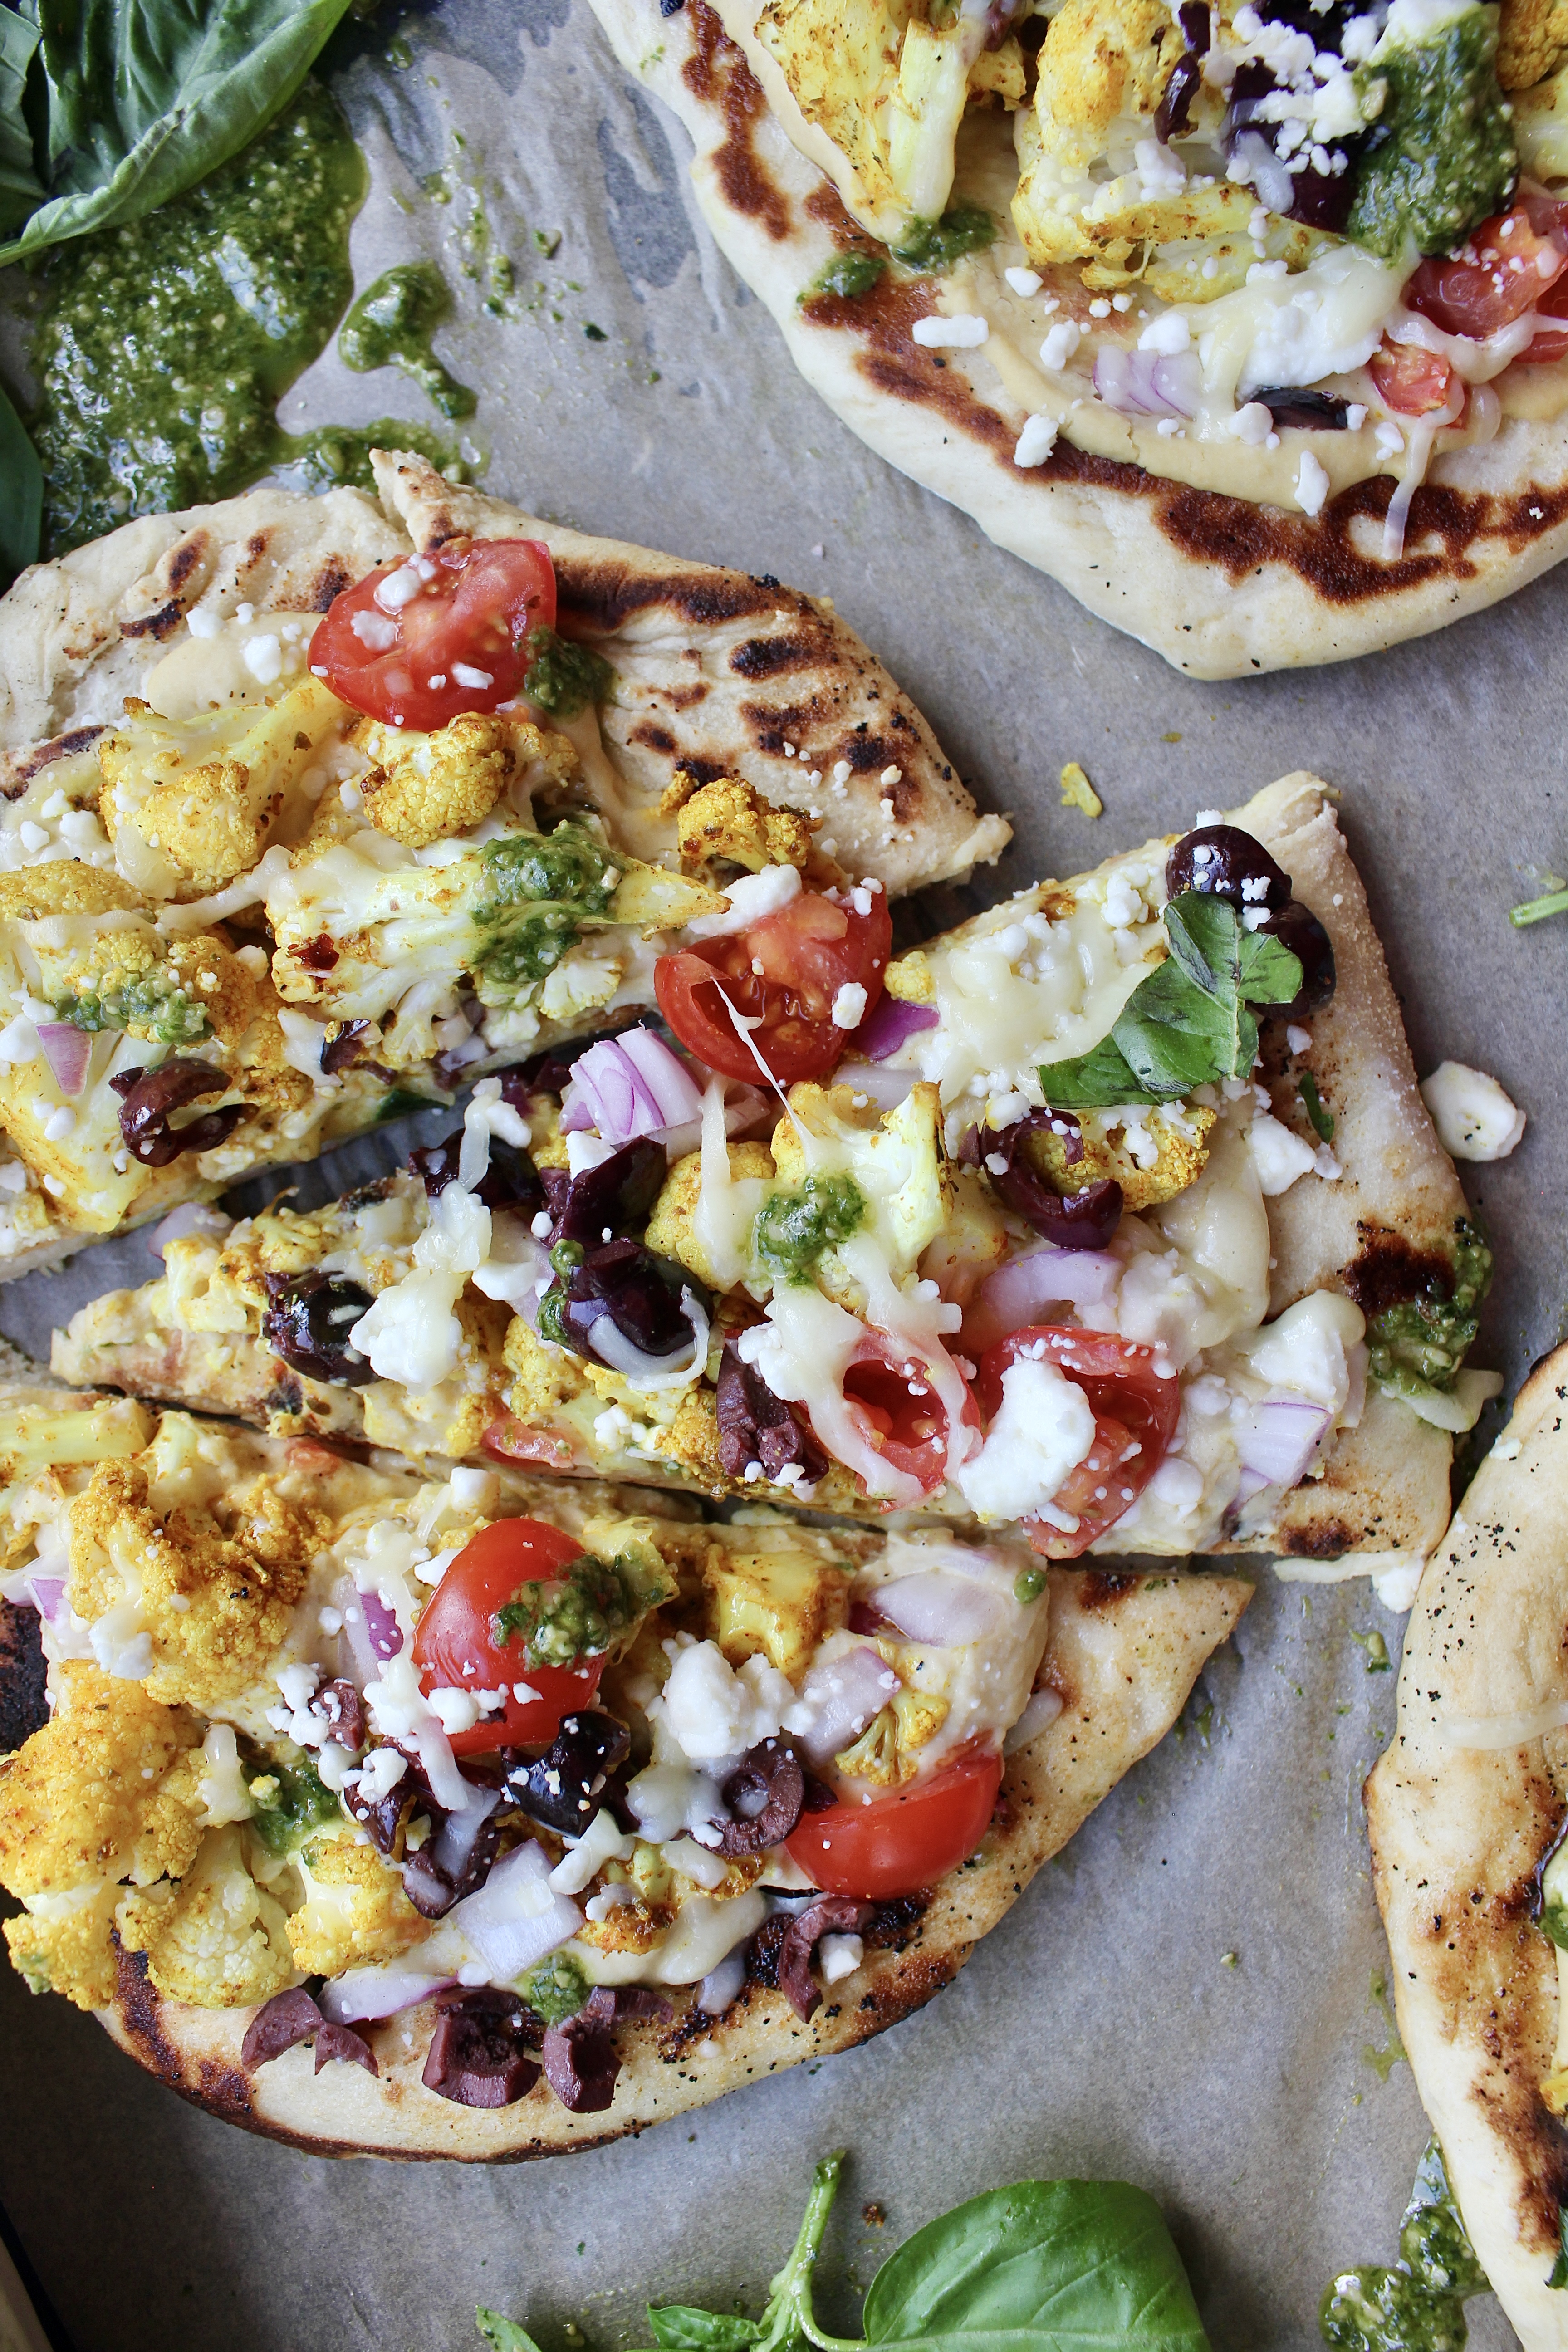 Warm and fluffy homemade naan layered with your favorite hummus, roasted shawarma cauliflower, tons of Greek toppings, and all the cheese: these Homemade Cauliflower Shawarma Naan Flatbreads are everyone’s favorite! 